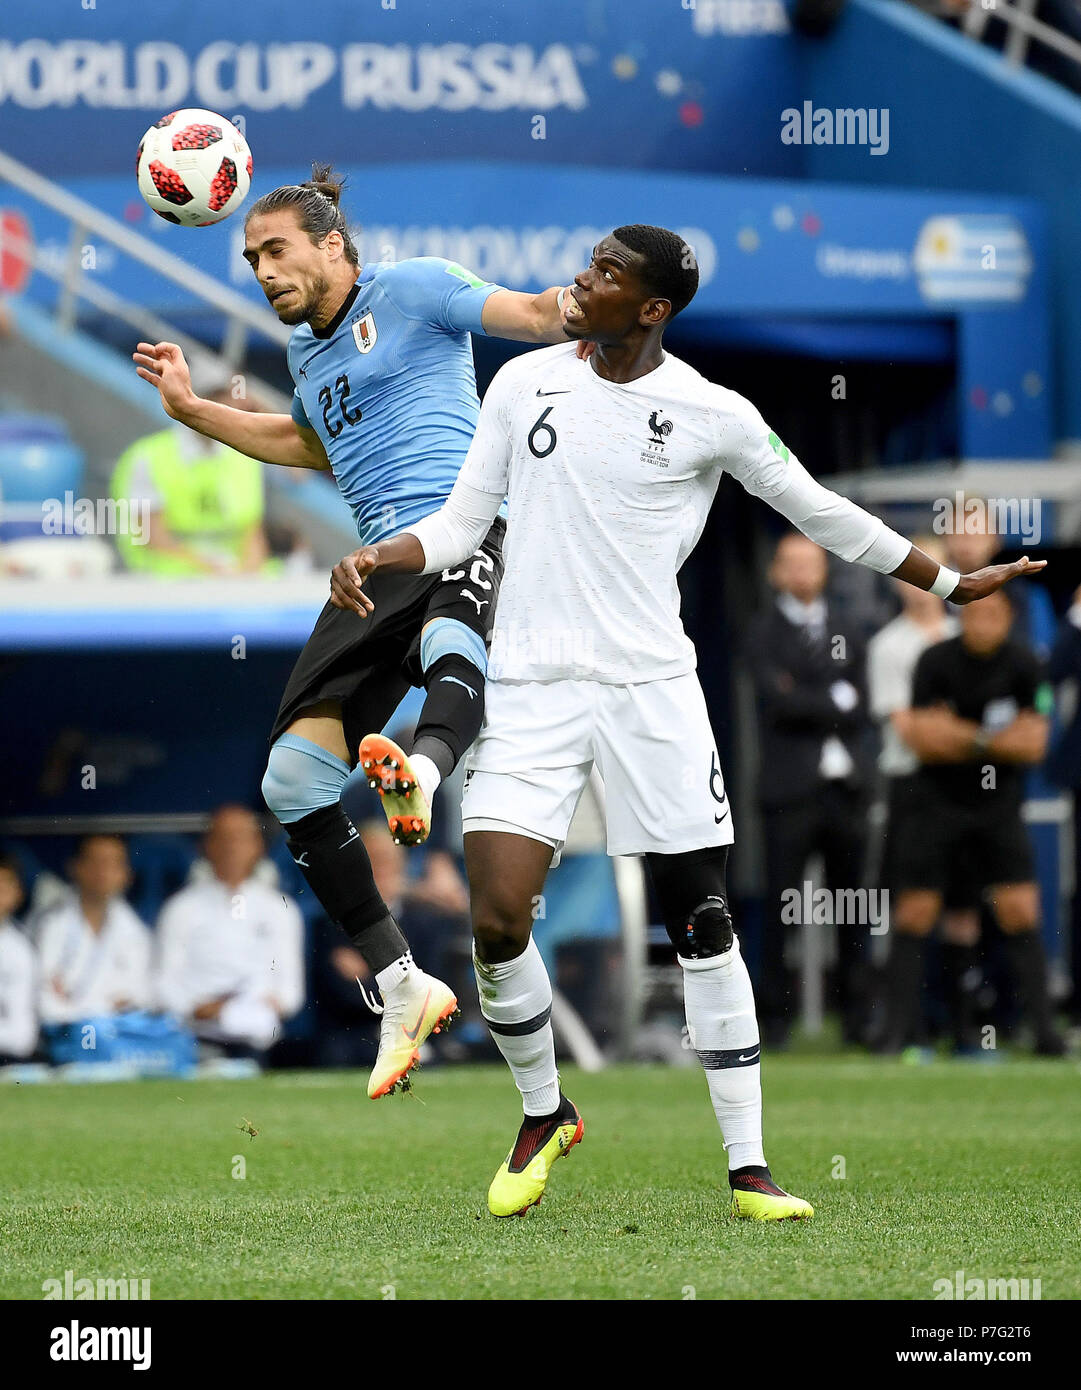 Nizhny Novgorod, Russia. 6th July, 2018. Martin Caceres (L) of Uruguay vies with Paul Pogba of France during the 2018 FIFA World Cup quarter-final match between Uruguay and France in Nizhny Novgorod, Russia, July 6, 2018. Credit: Chen Cheng/Xinhua/Alamy Live News Stock Photo